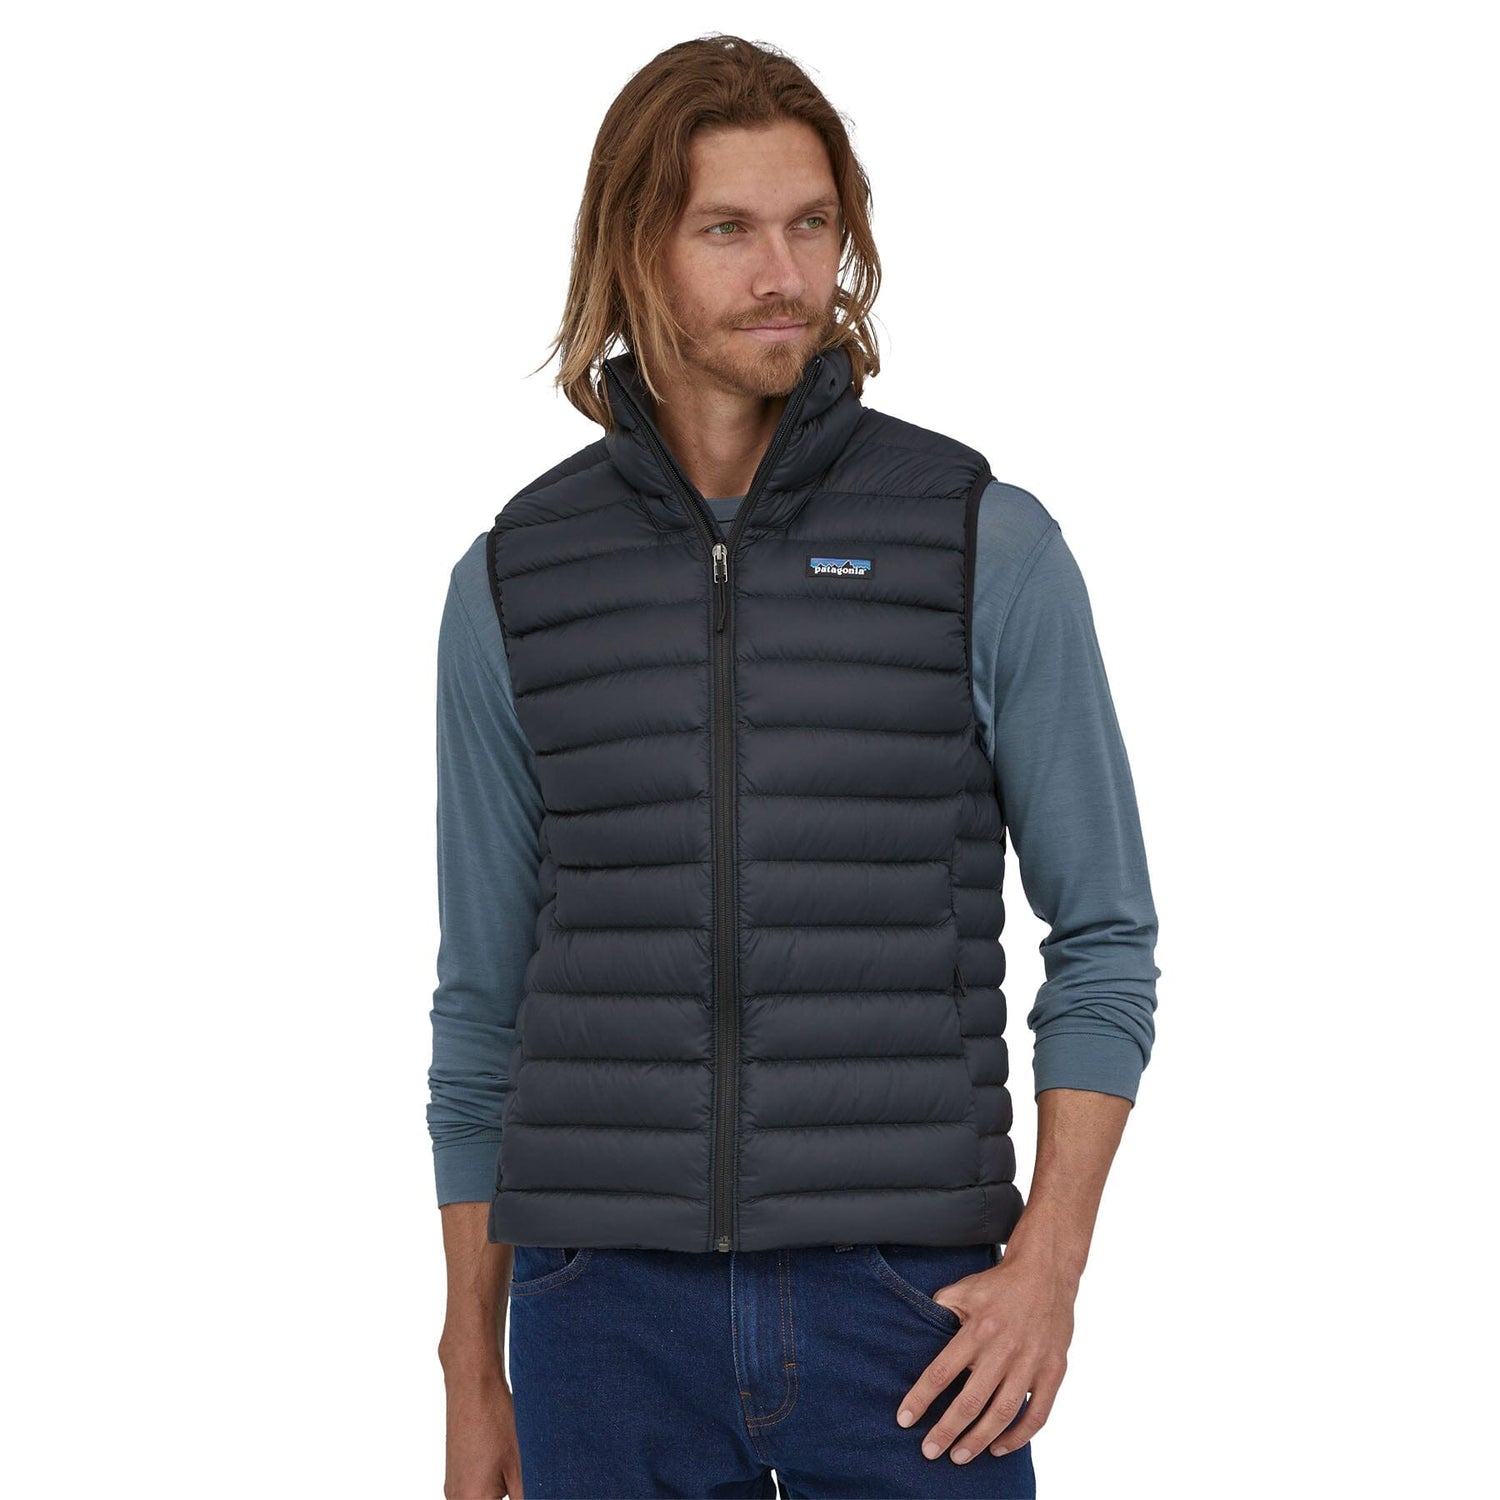 Patagonia - M's Down Sweater Vest - Recycled nylon & Responsible Down Standard down - Weekendbee - sustainable sportswear